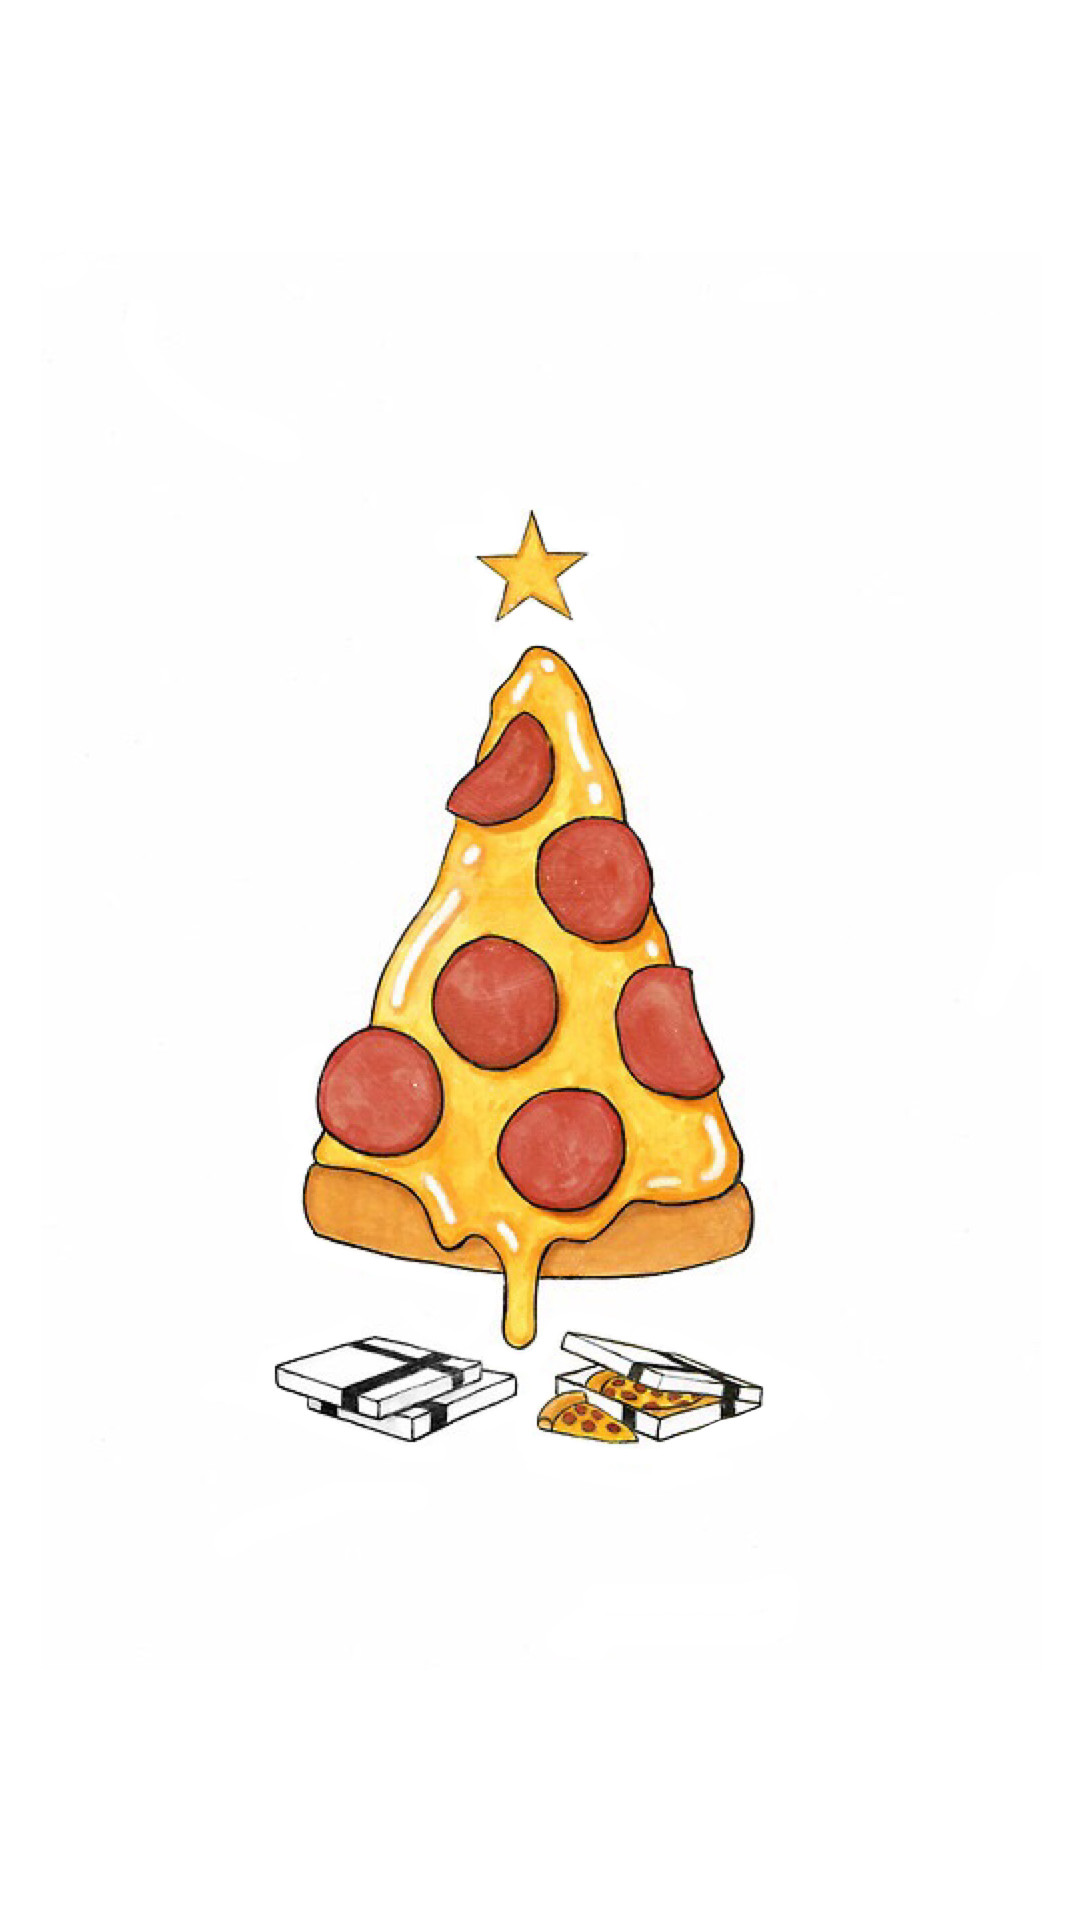 1080x1920 Pizza Christmas Tree Presents iPhone 6+ HD Wallpaper -  http://freebestpicture.